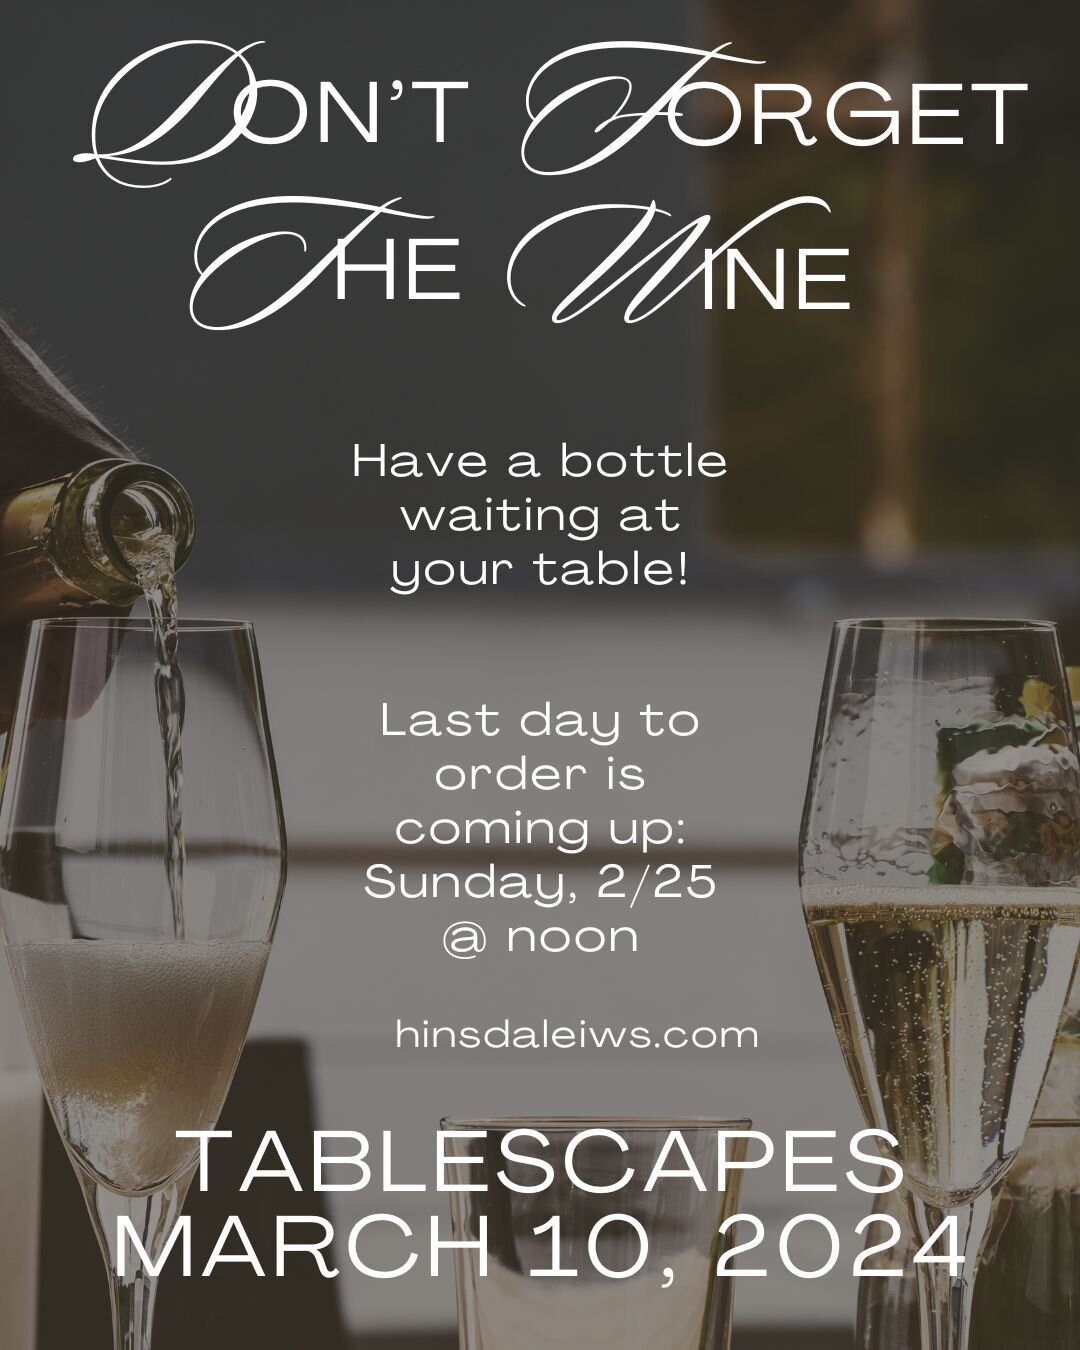 The wine selection is great and only available if you order in advance. 

Get yours today by going to www.hinsdaleiws/tablescapes2024.com. The wine selections are listed below the Tablescapes ticket purchase option.